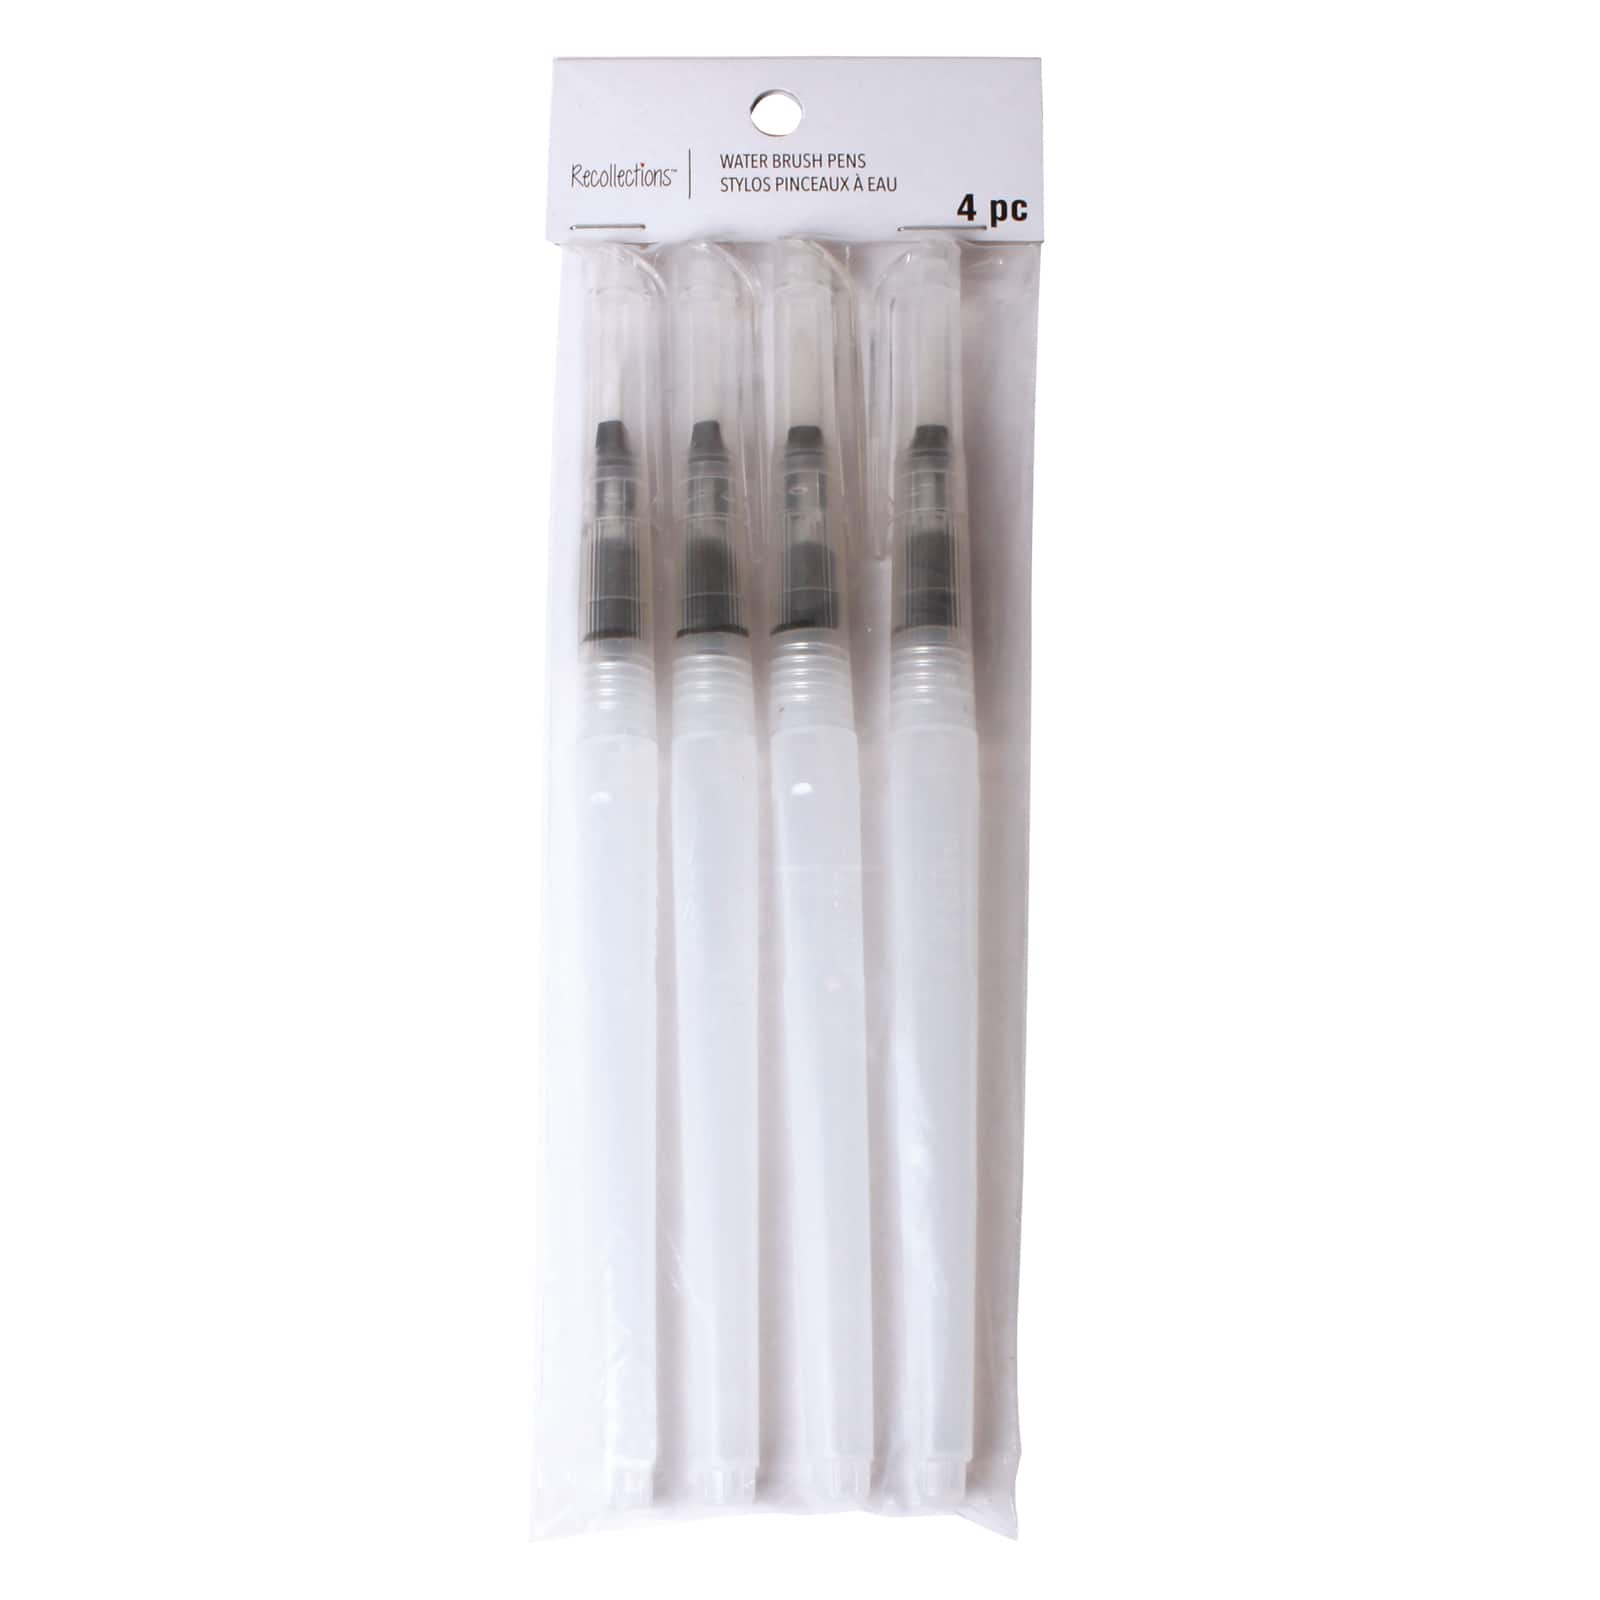 Recollections Water Brush Pens - 4 ct